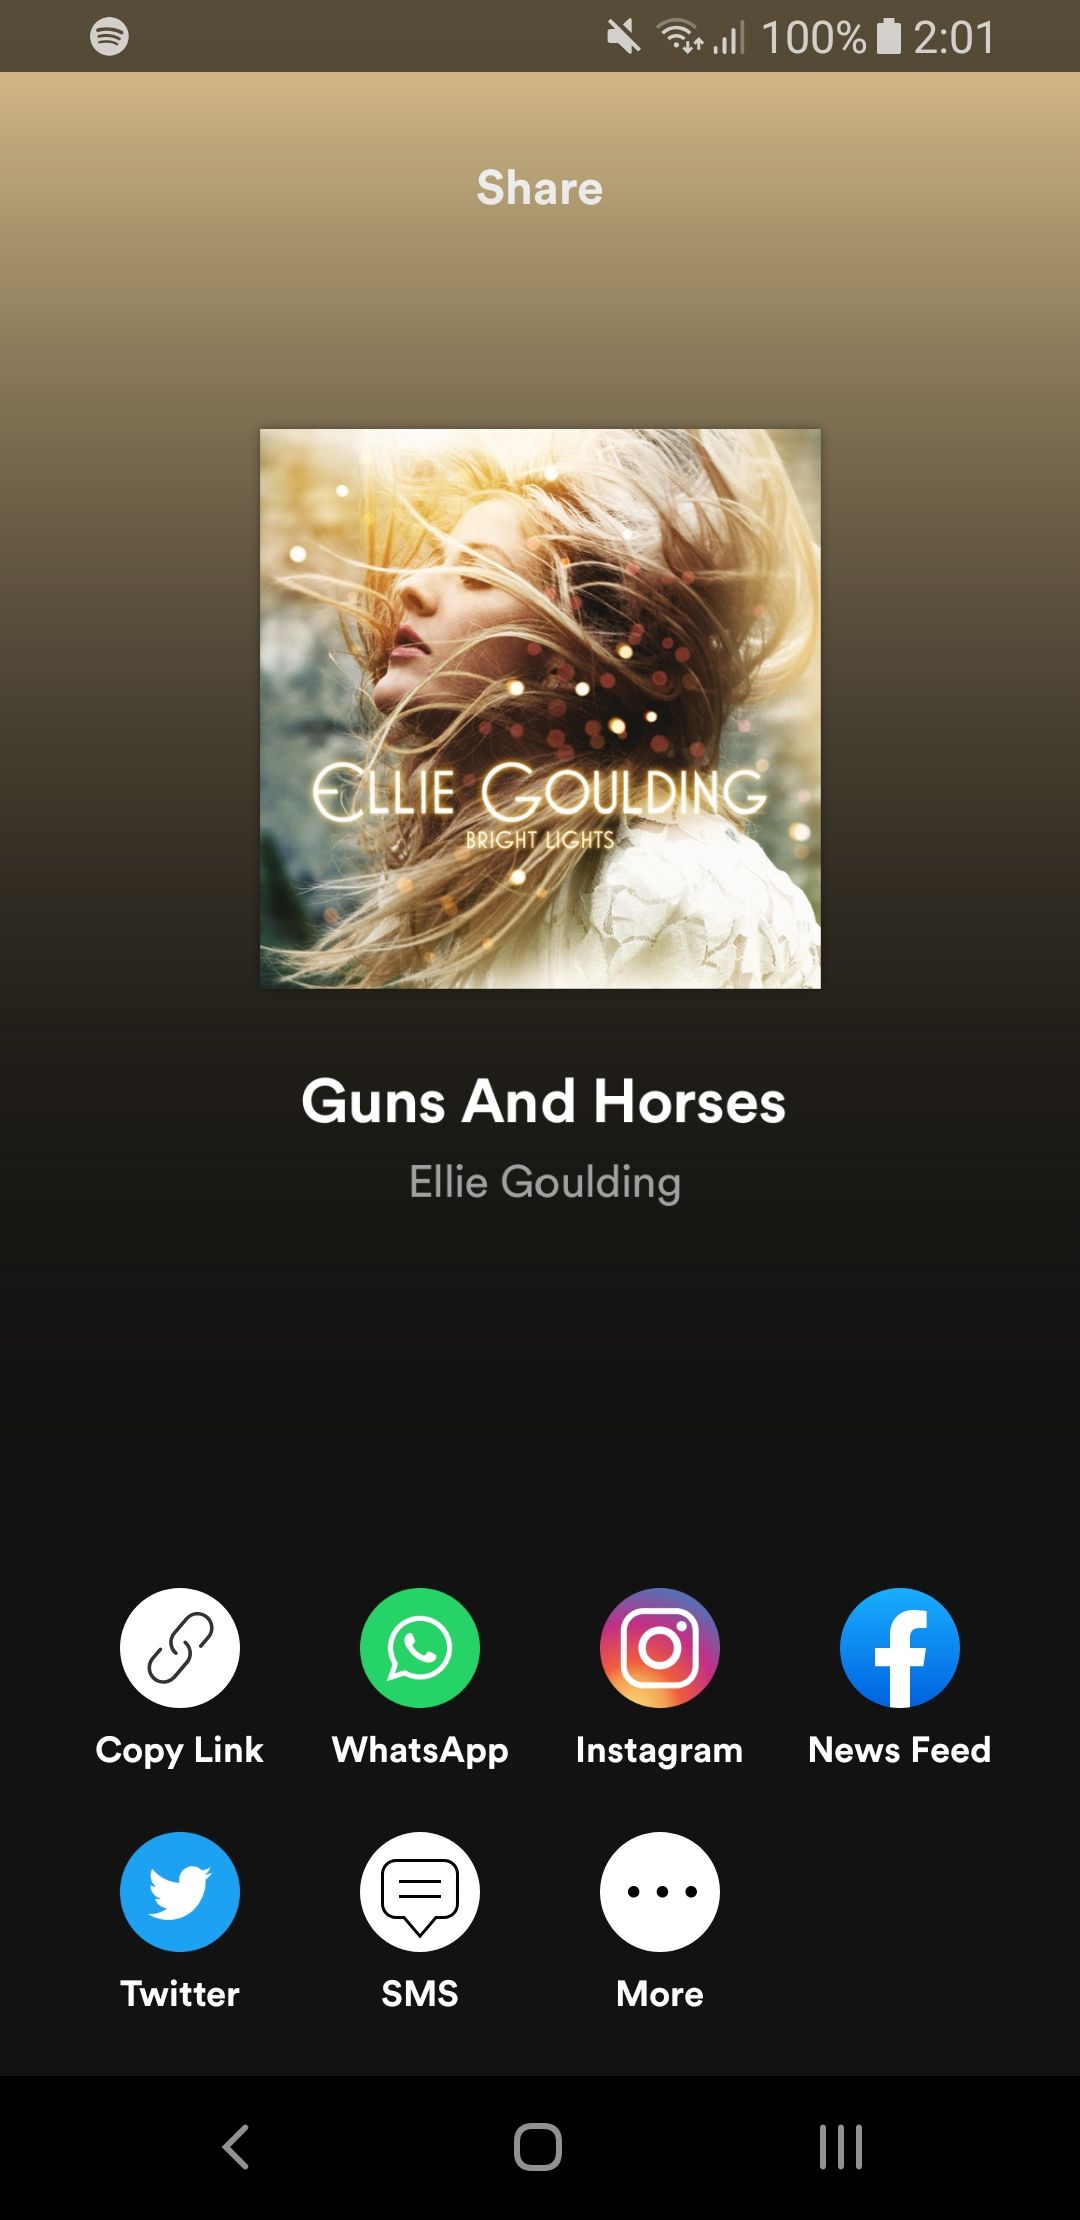 sharing a song on spotify